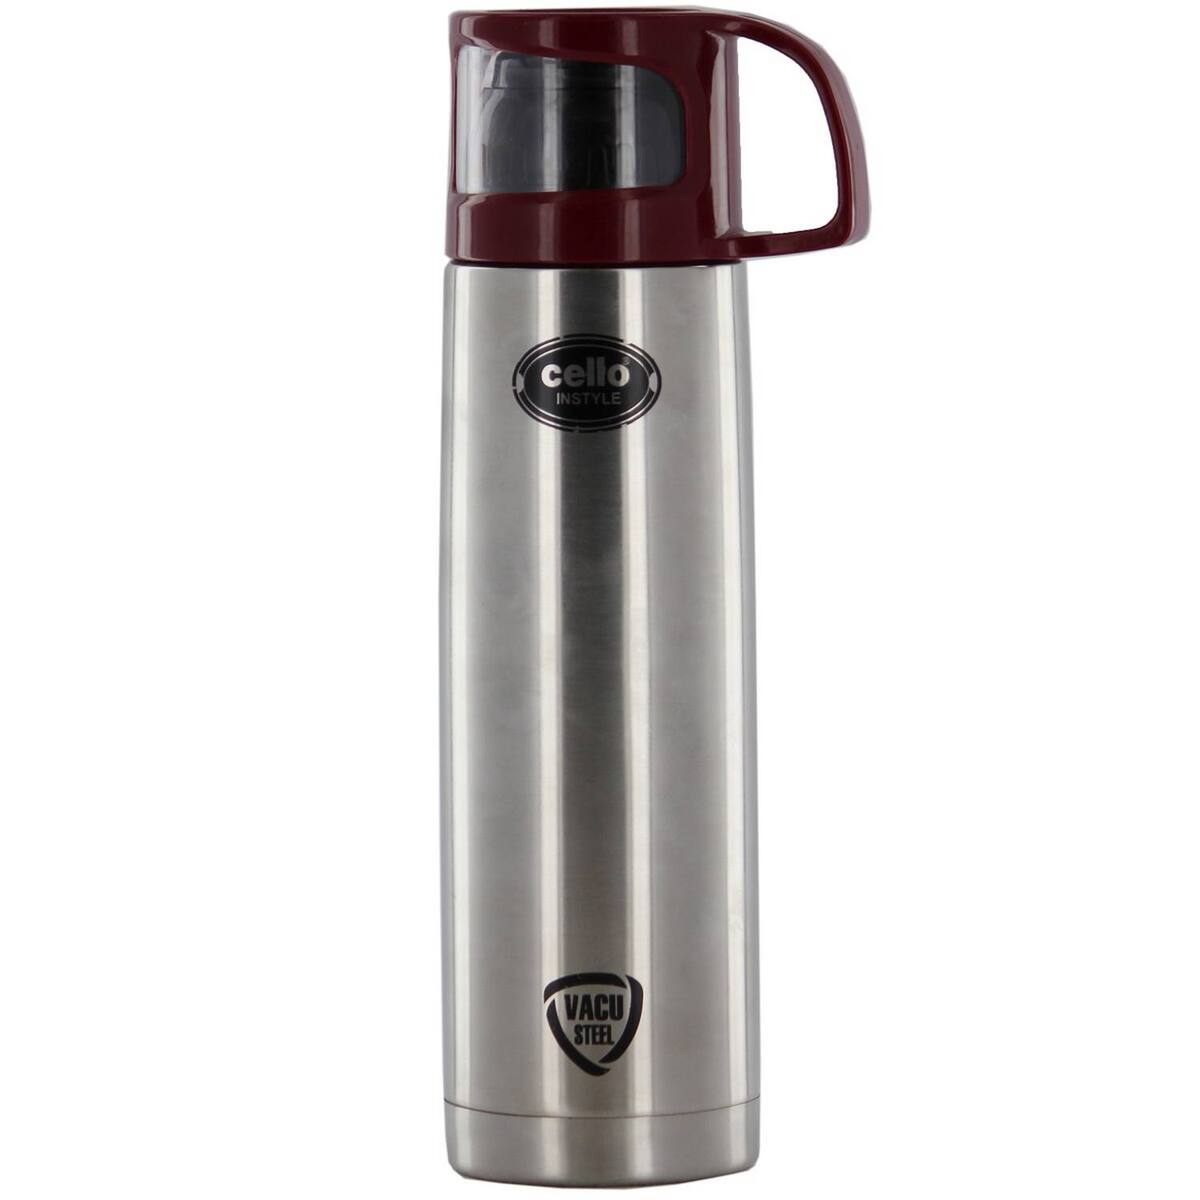 Cello Stainless Steel Flask Instyle 750ml